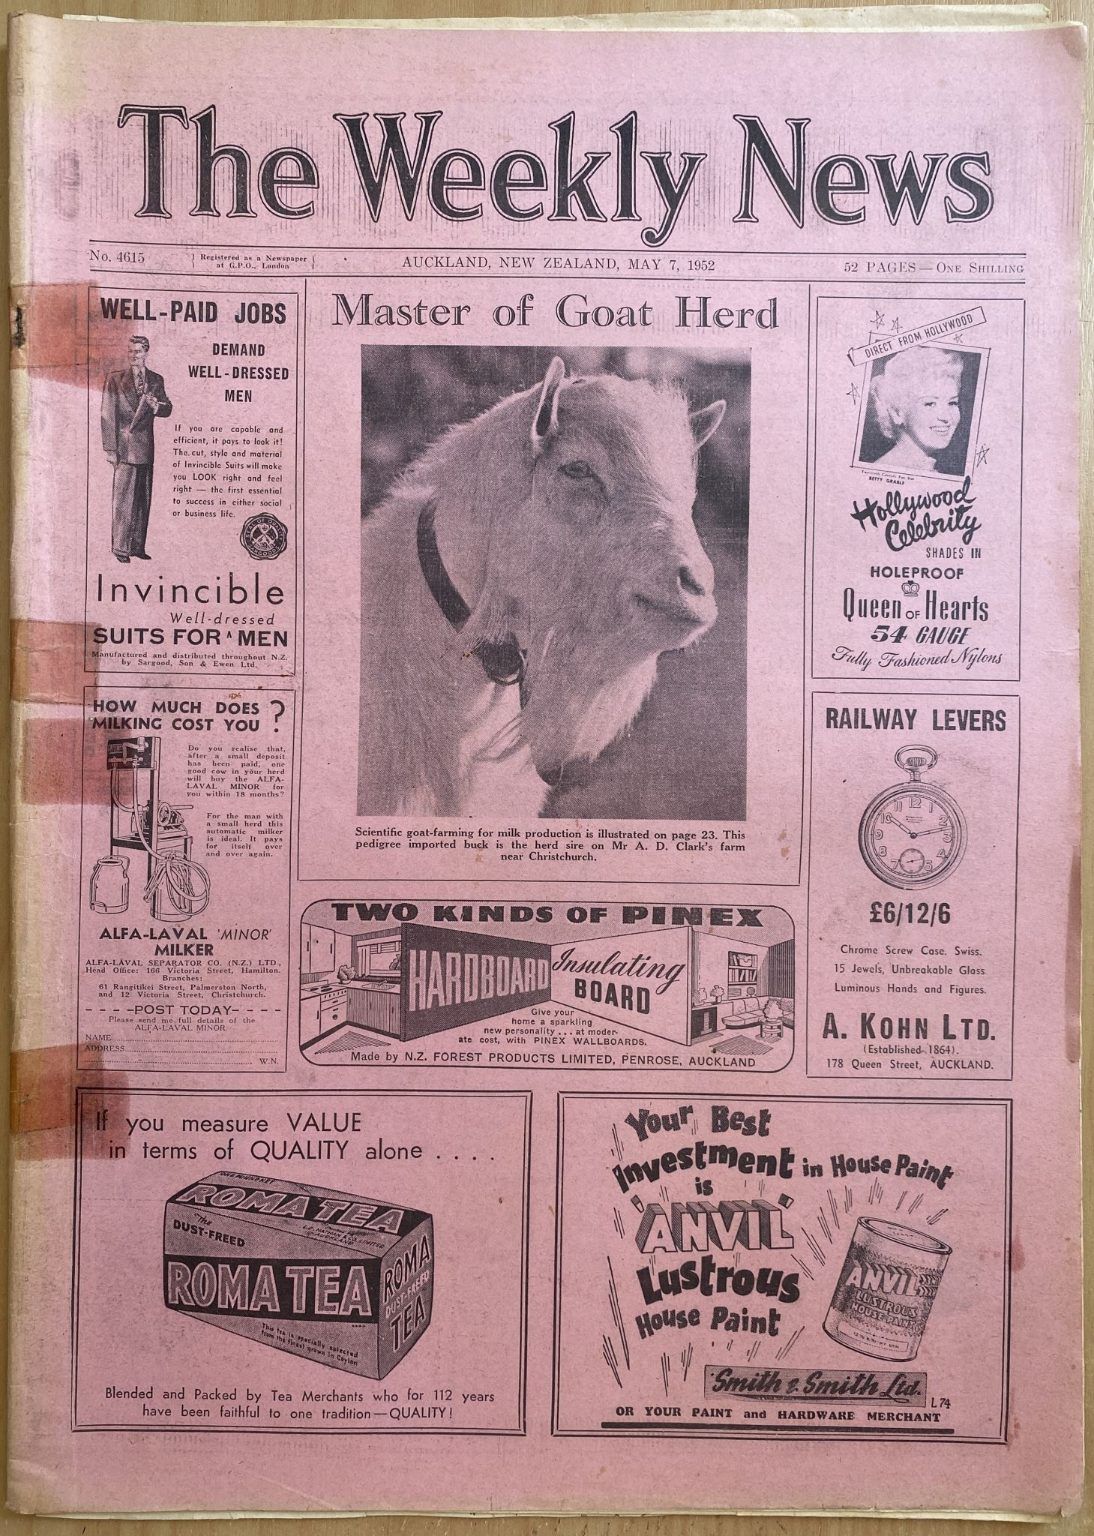 OLD NEWSPAPER: The Weekly News - No. 4615, 7 May 1952